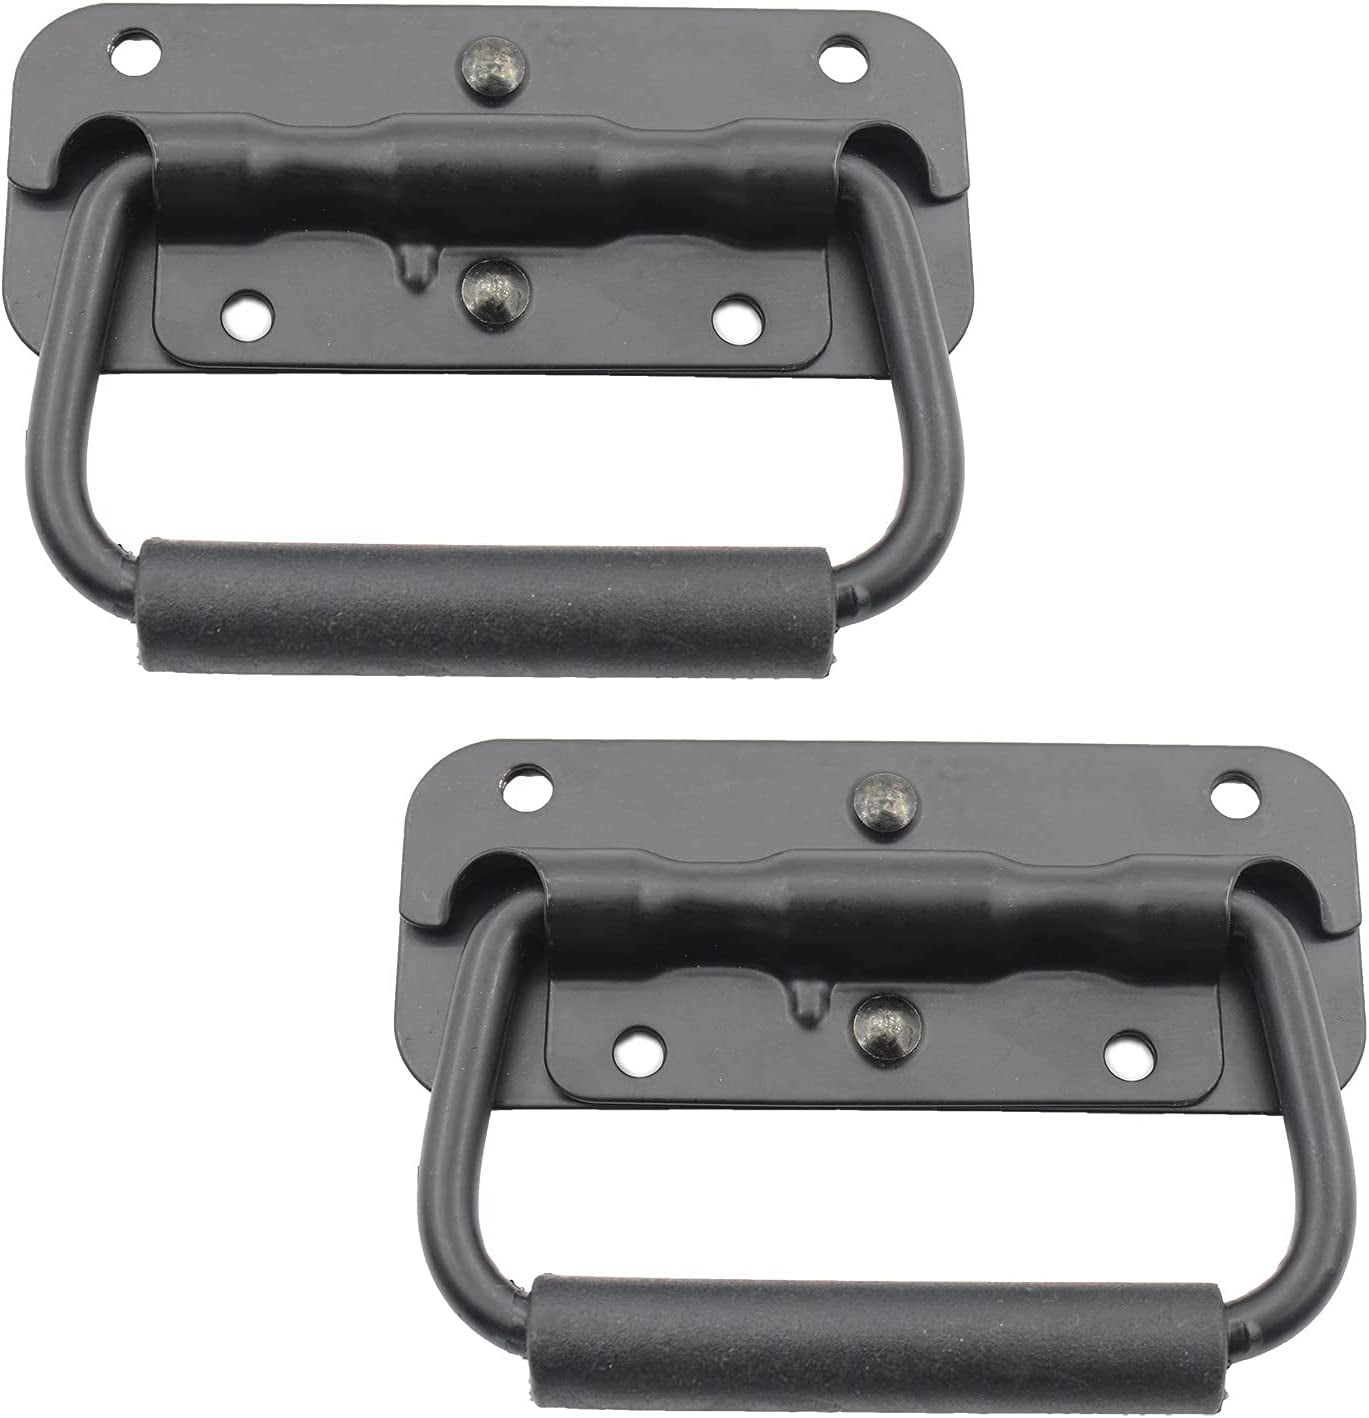 Tool Box Handle Chrome Finish 1 Pair Set of 2 Spring Loaded Surface Mount Speaker Cabinet Handles with Rubber Grip 